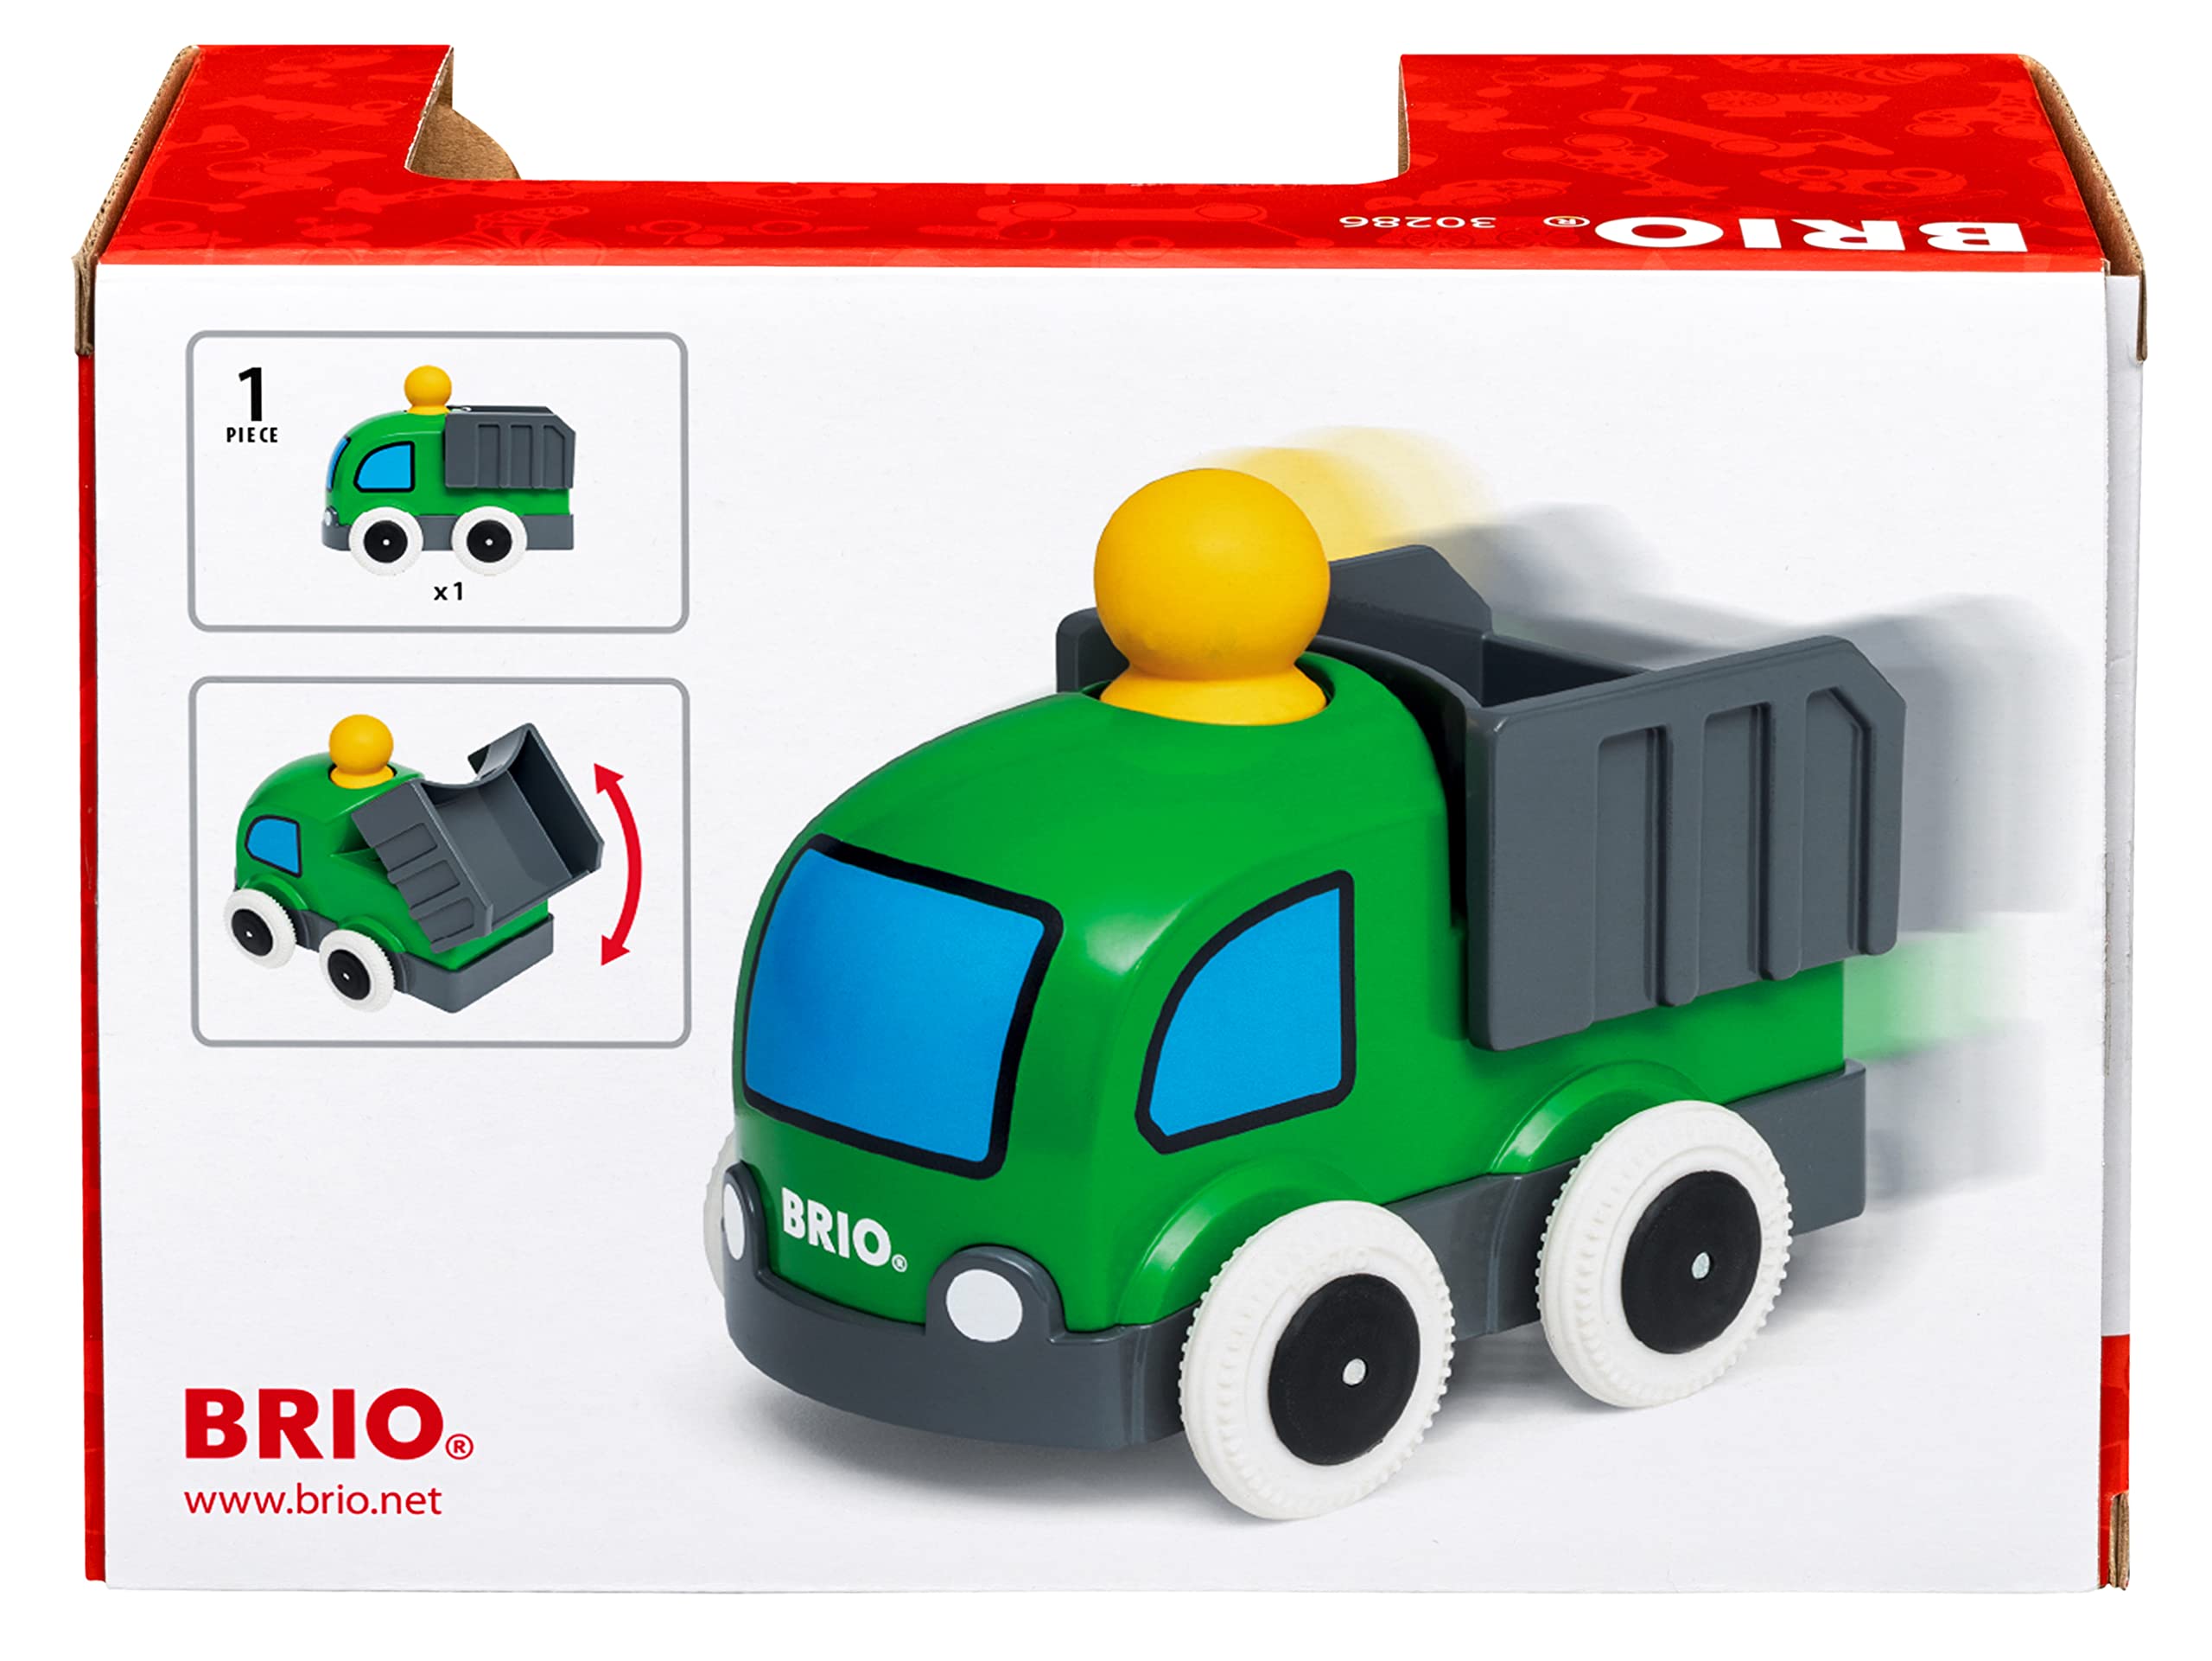 Brio Push & Go Truck Push Along Vehicle - Educational Toddler Toy for Kids 12 Months Up (Children 1 Year Old)